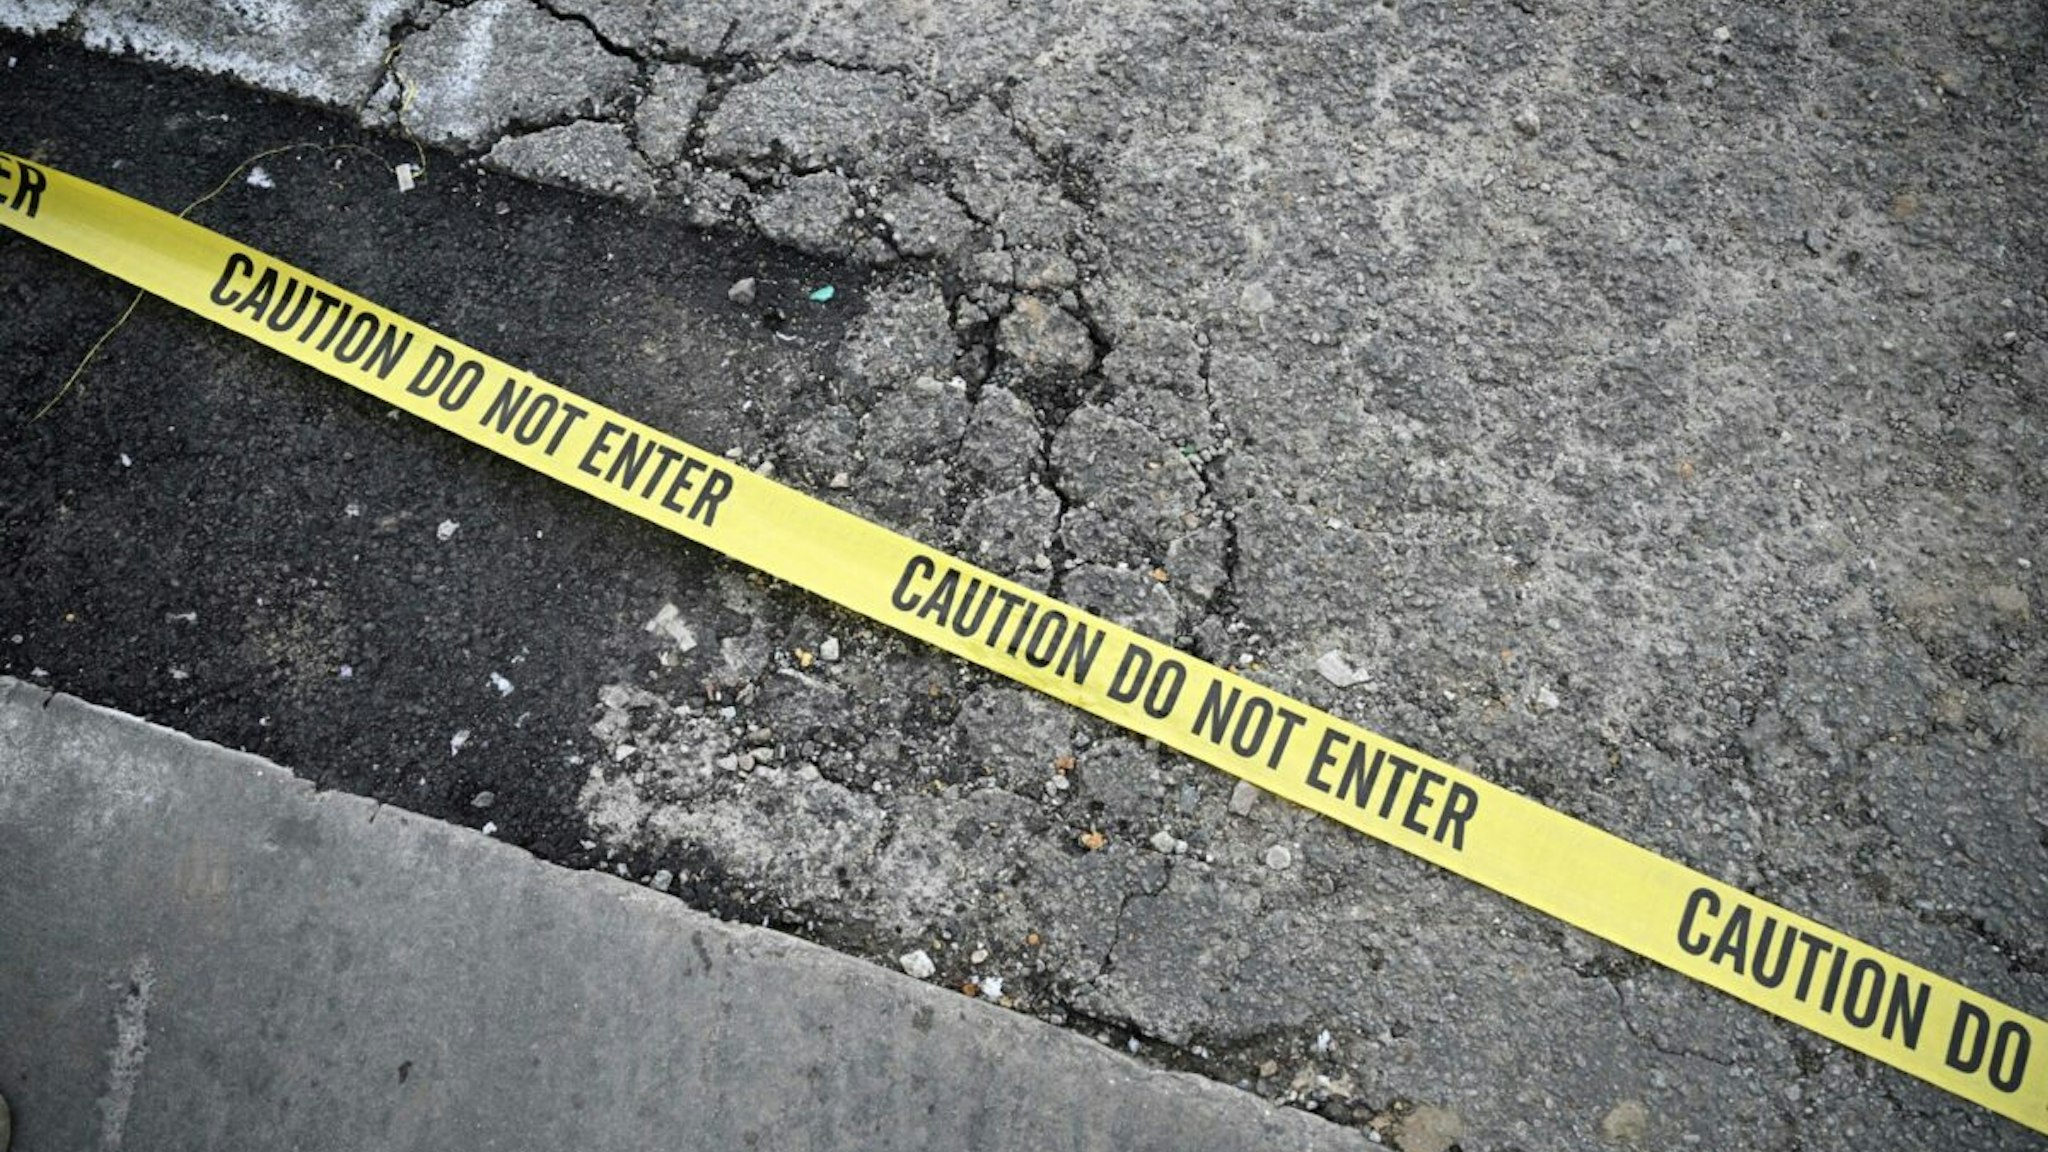 Police tape is seen on the ground at the scene of a mass shooting in Monterey Park, California, on January 22, 2023.